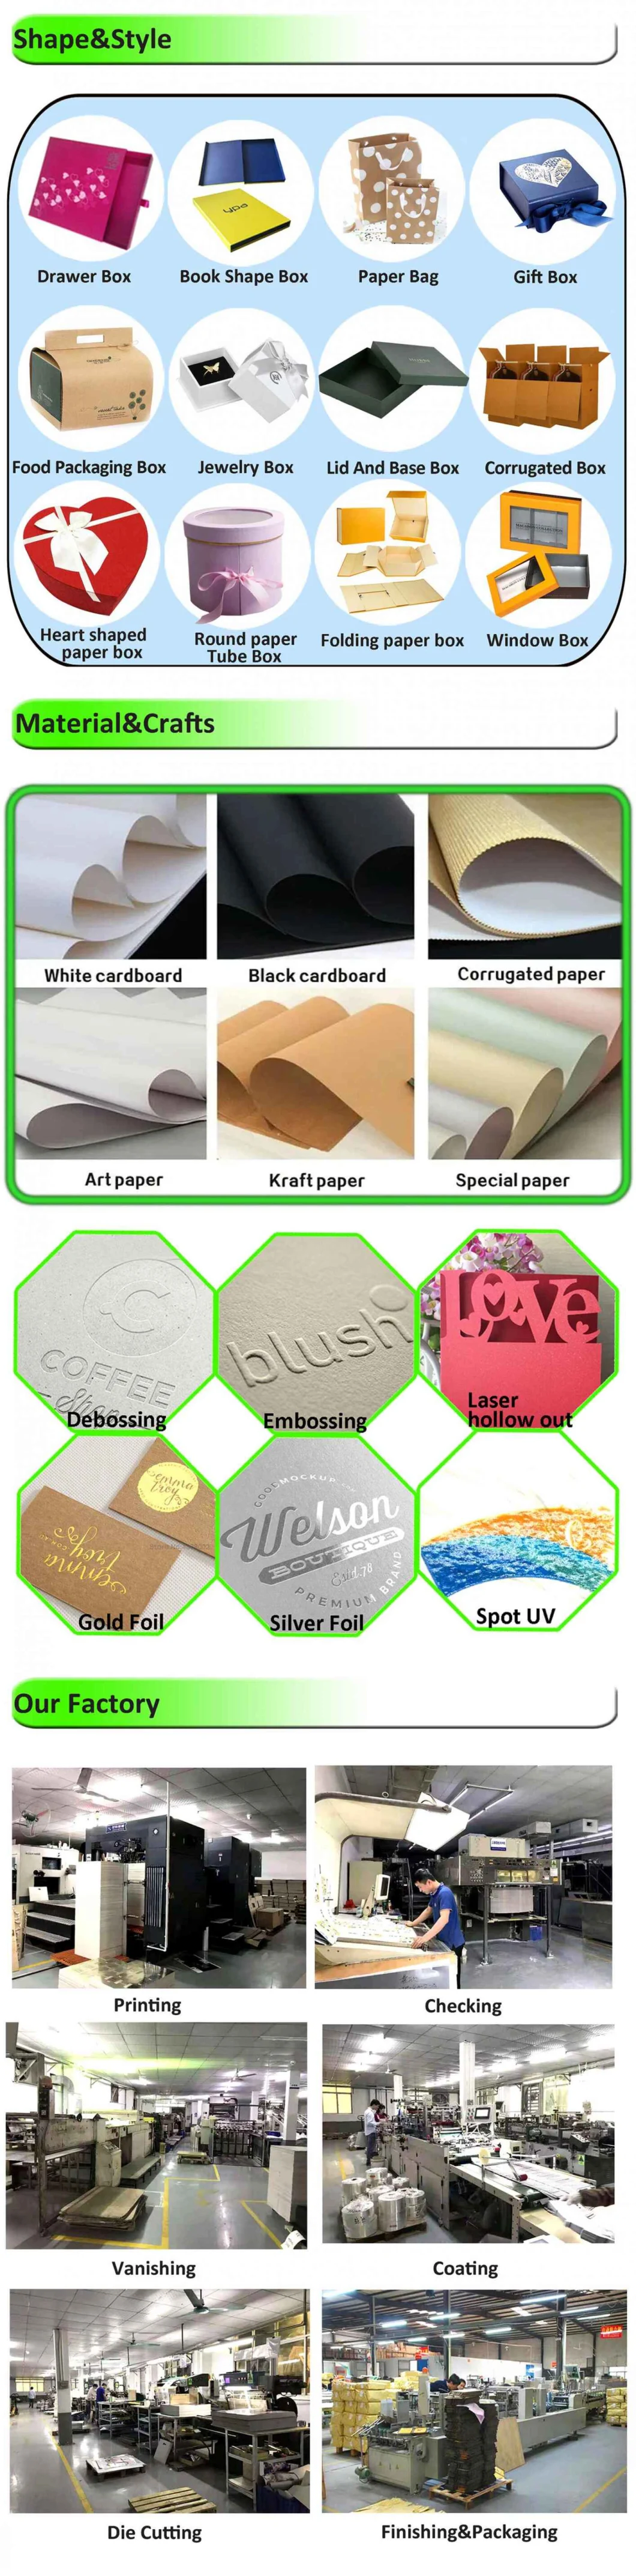 Folding Square Shape Flower Printed Cardboard Cake/ Cookie/ Candy/ Chocolate/ Dessert Packaging Paper Box